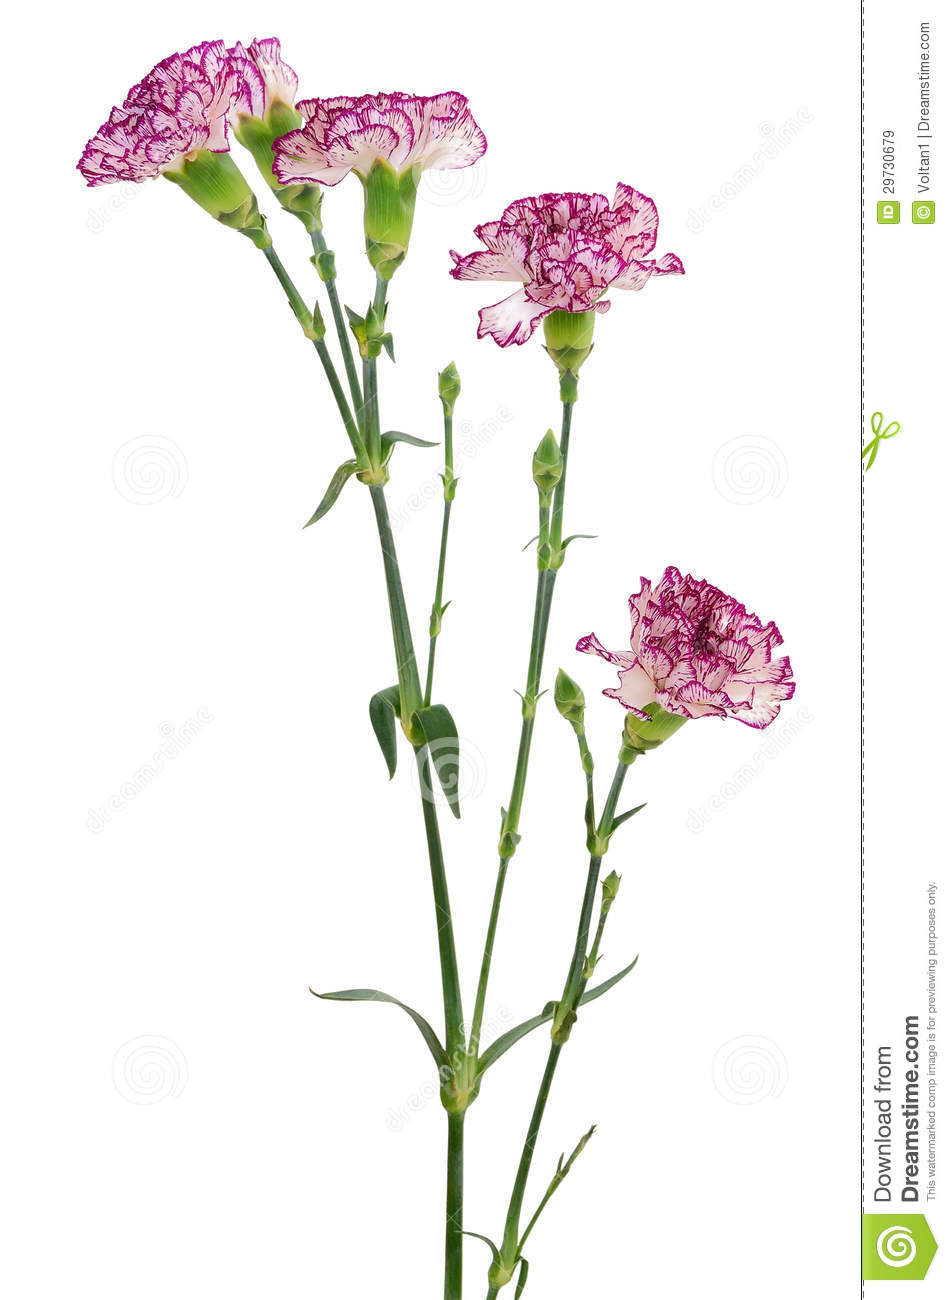 Branch Of Purple Carnation Flower Royalty Free Stock Images   Image